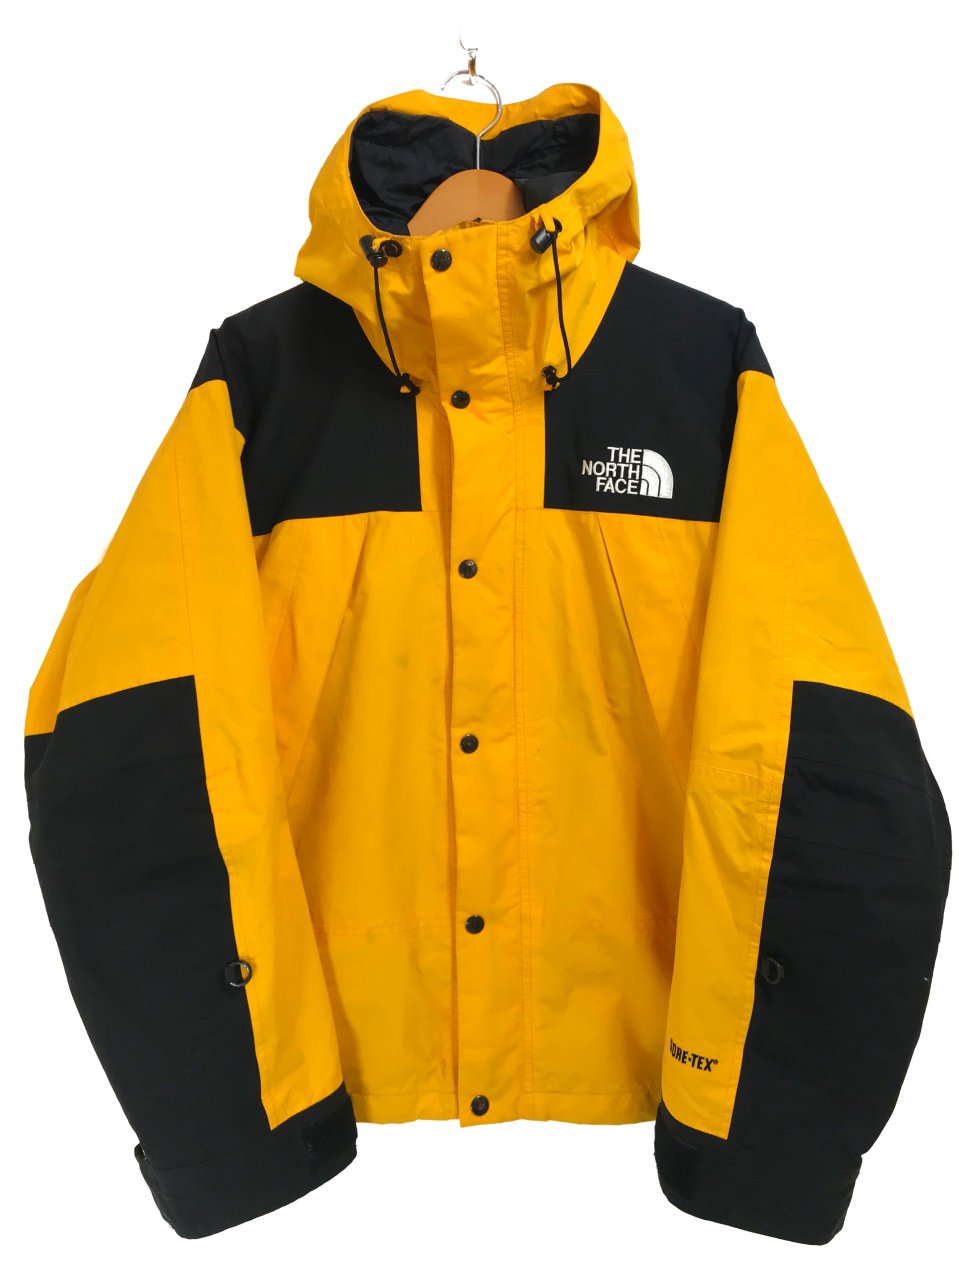 THE NORTH FACE Mountain Jacket 黄黒 M ノースフェイス マウンテン 